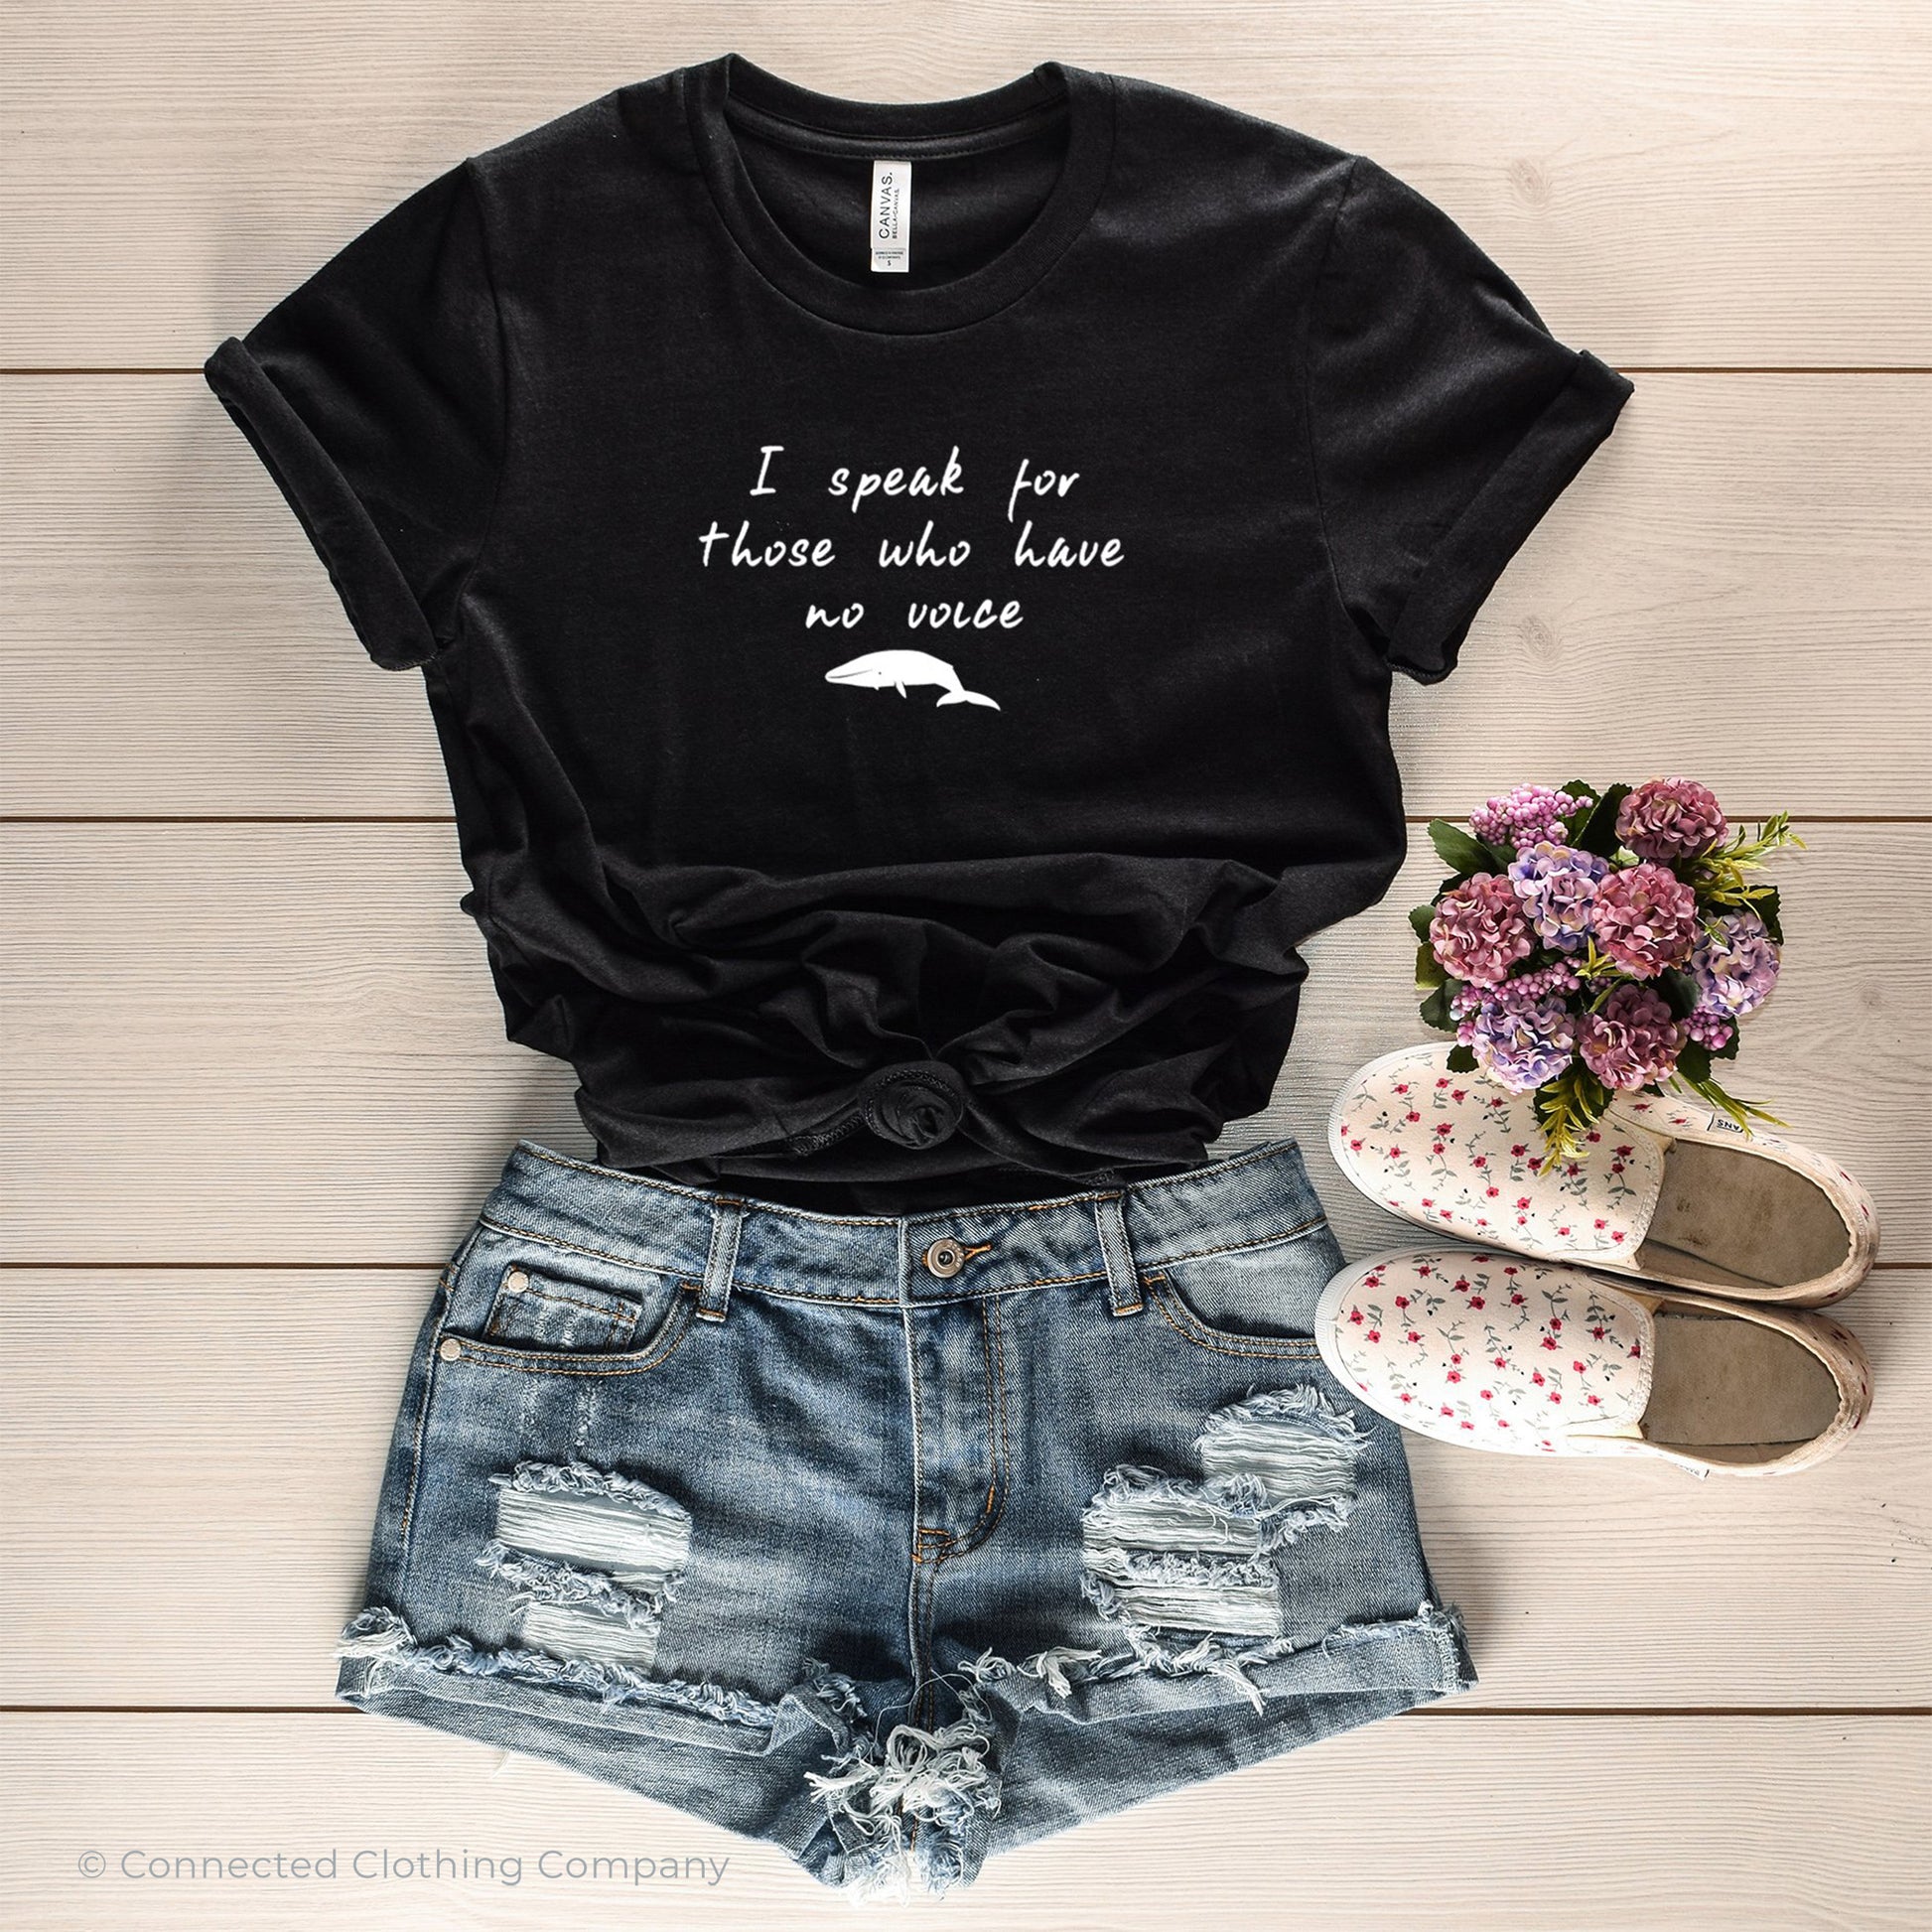 Be The Voice Whale Unisex Short-Sleeve Tee in Black - sweetsherriloudesigns donates 10% of the profits from this t-shirt to Mission Blue ocean conservation